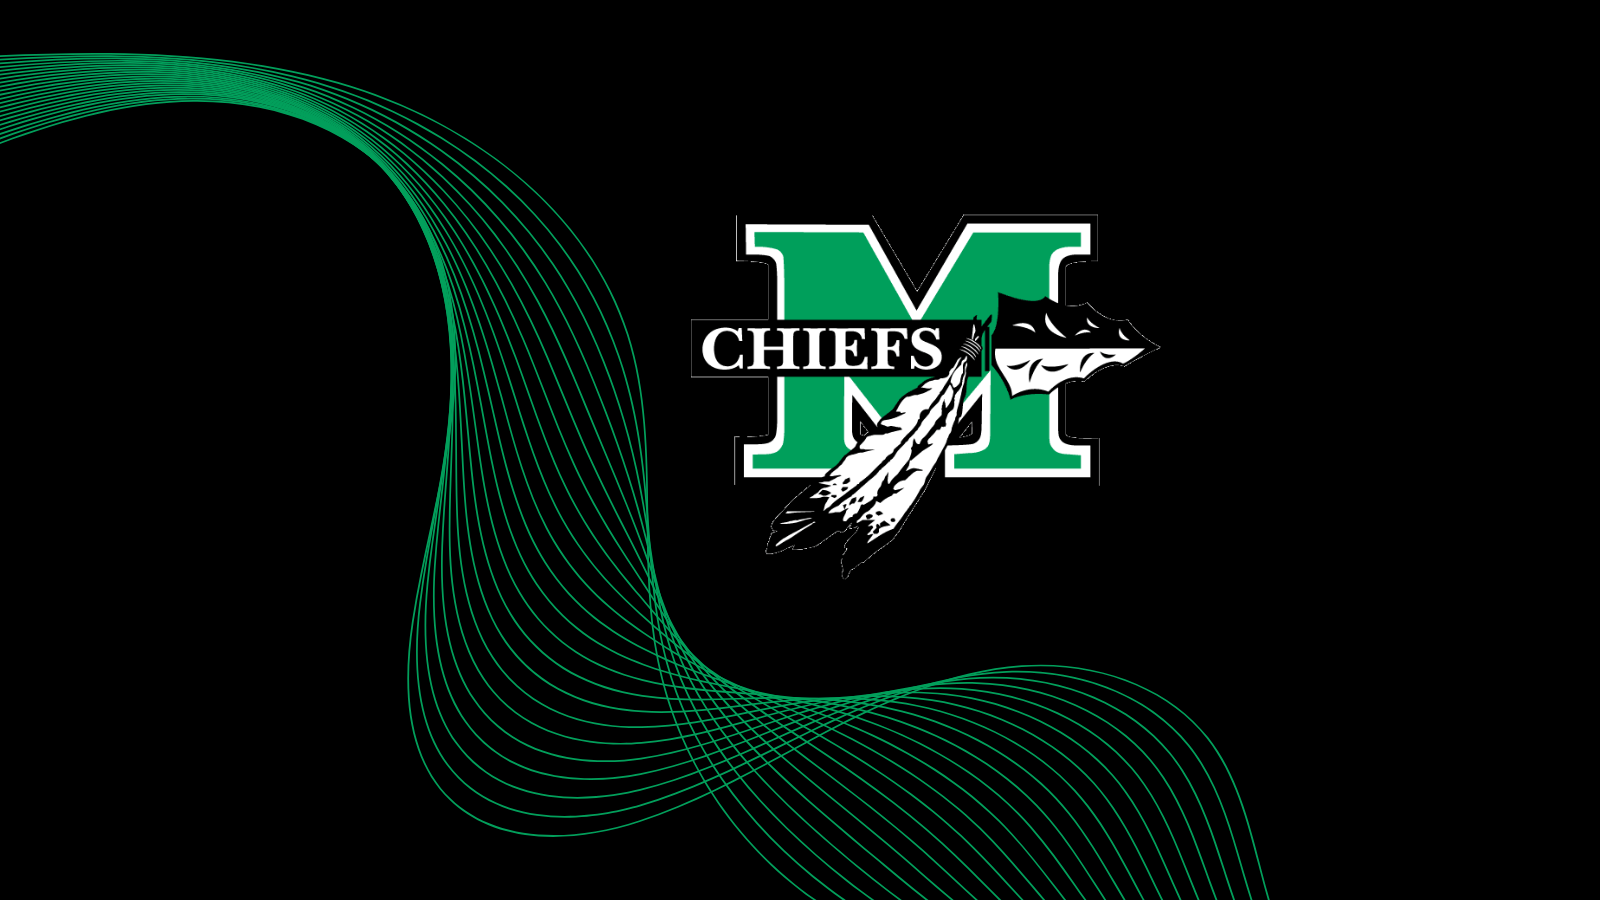 McIntosh High School: All-in-One Event Management and Fan Engagement